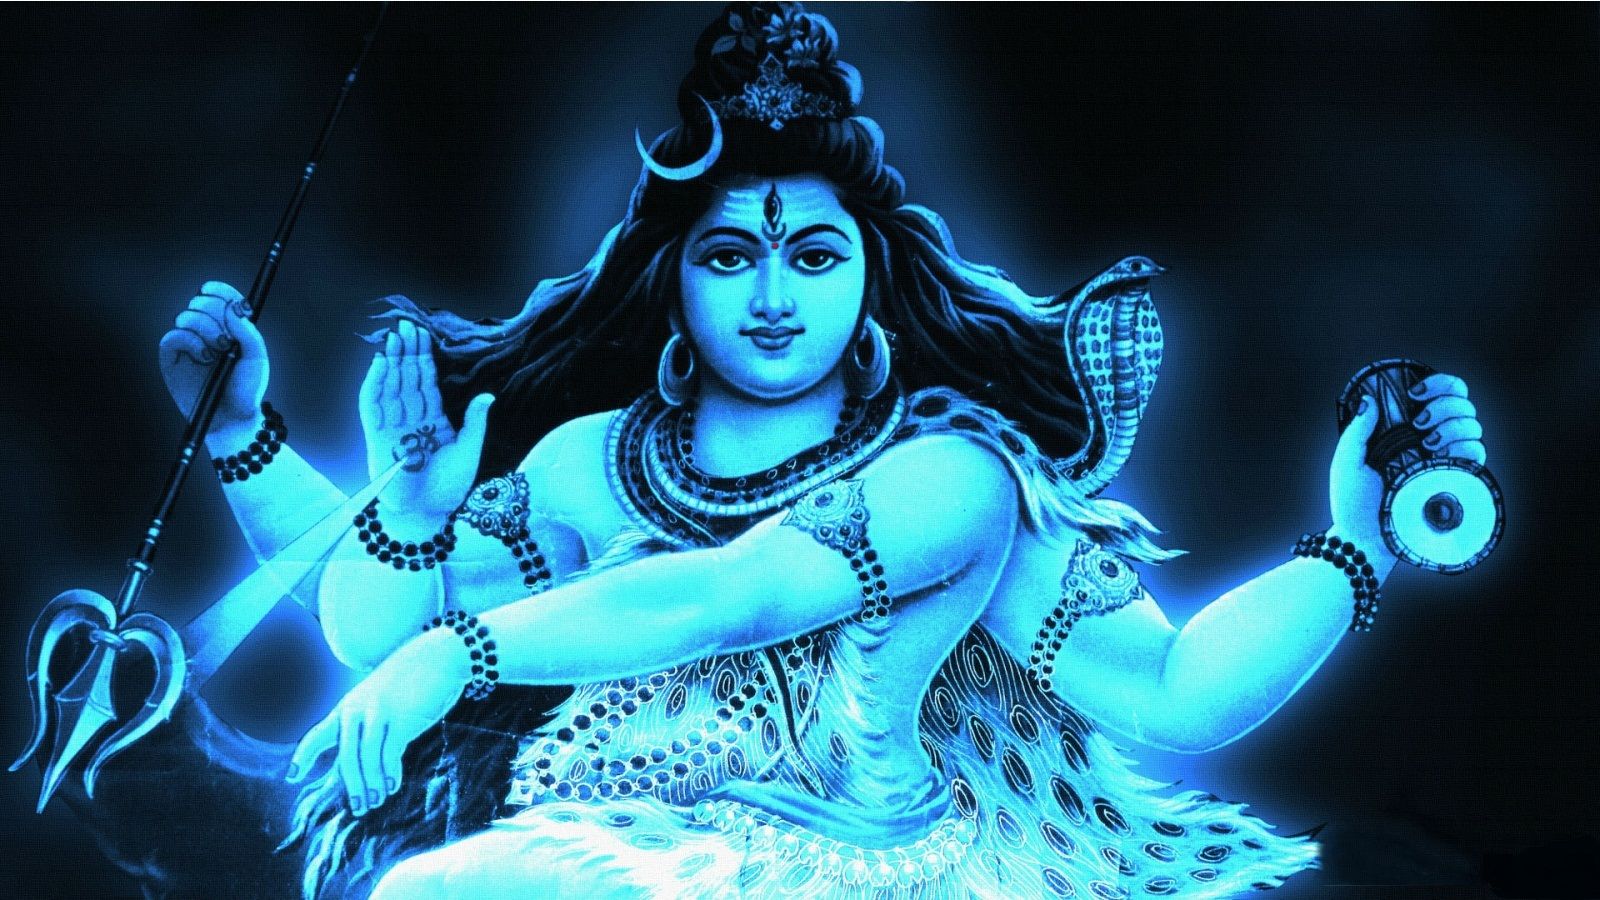 All god full hd wallpaper | Devotion mobile screen saver | Hindu god  picture in deferent backgrounds - Wallsnapy.com